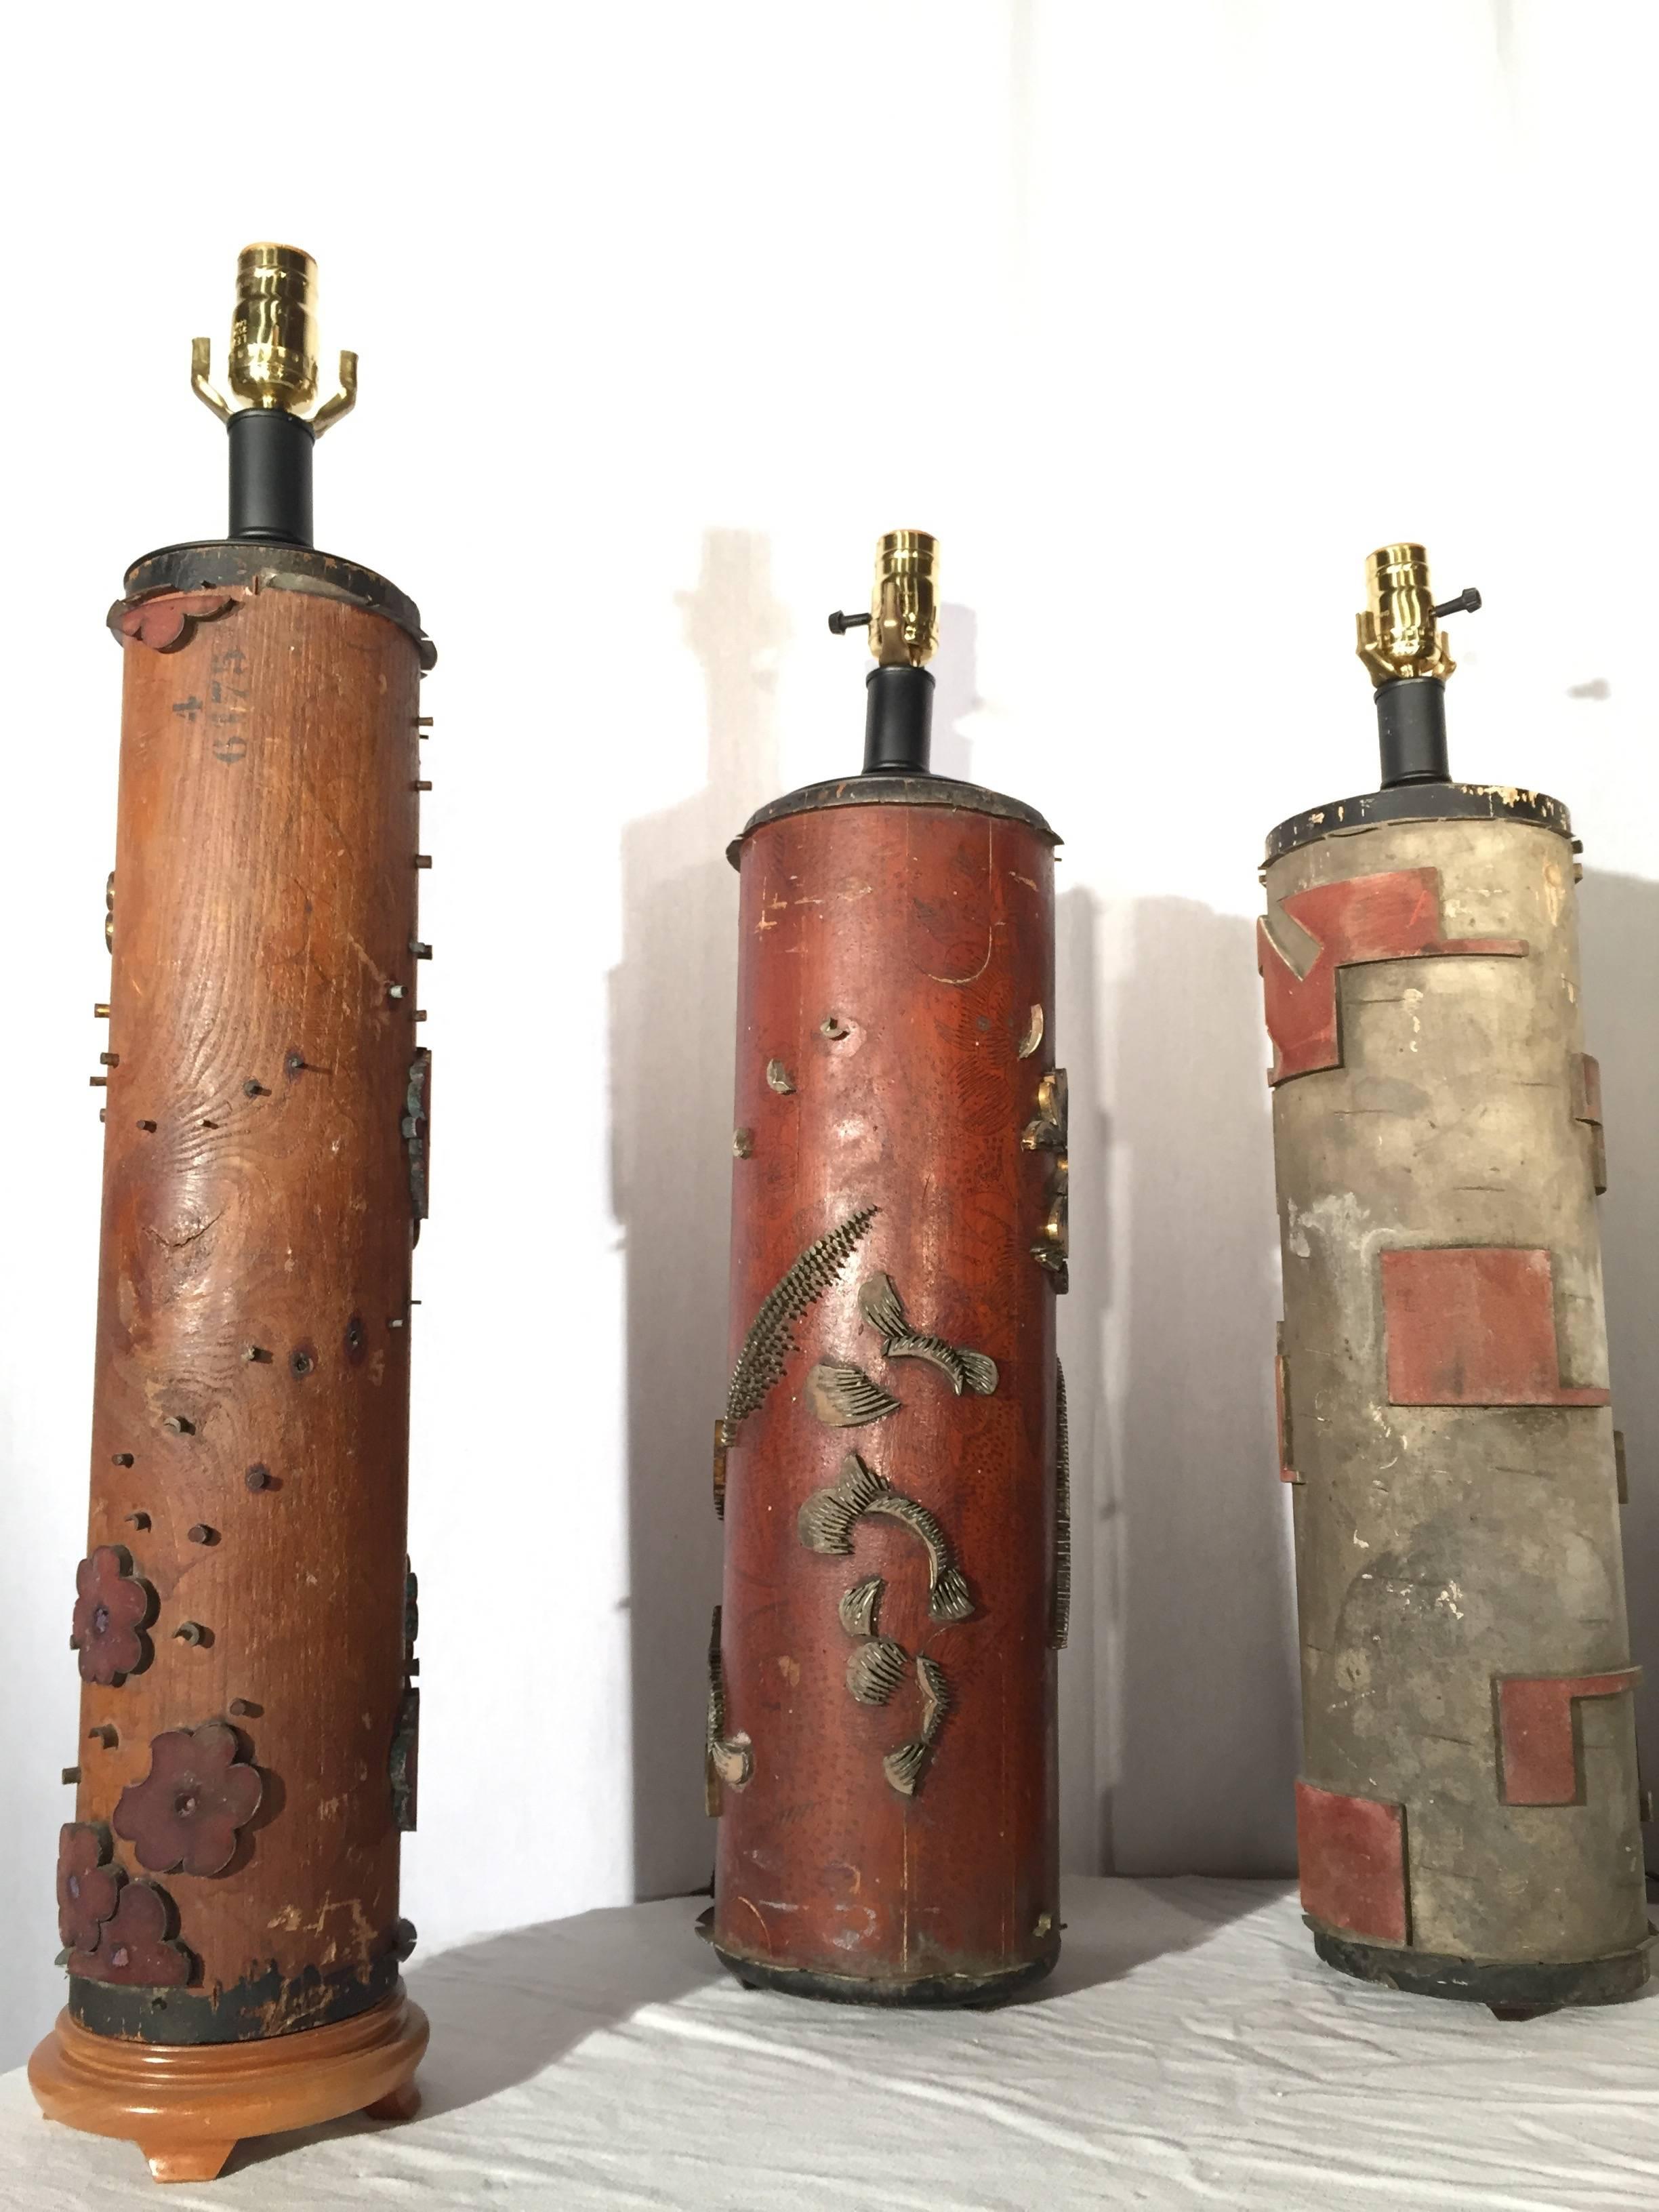 When wallpaper is printed by hand, separate rollers are made to each imprint a different color on the background. These vintage rollers from the 1930s are truly unusual and make great lamps that complement almost any decor. Ranging in height from